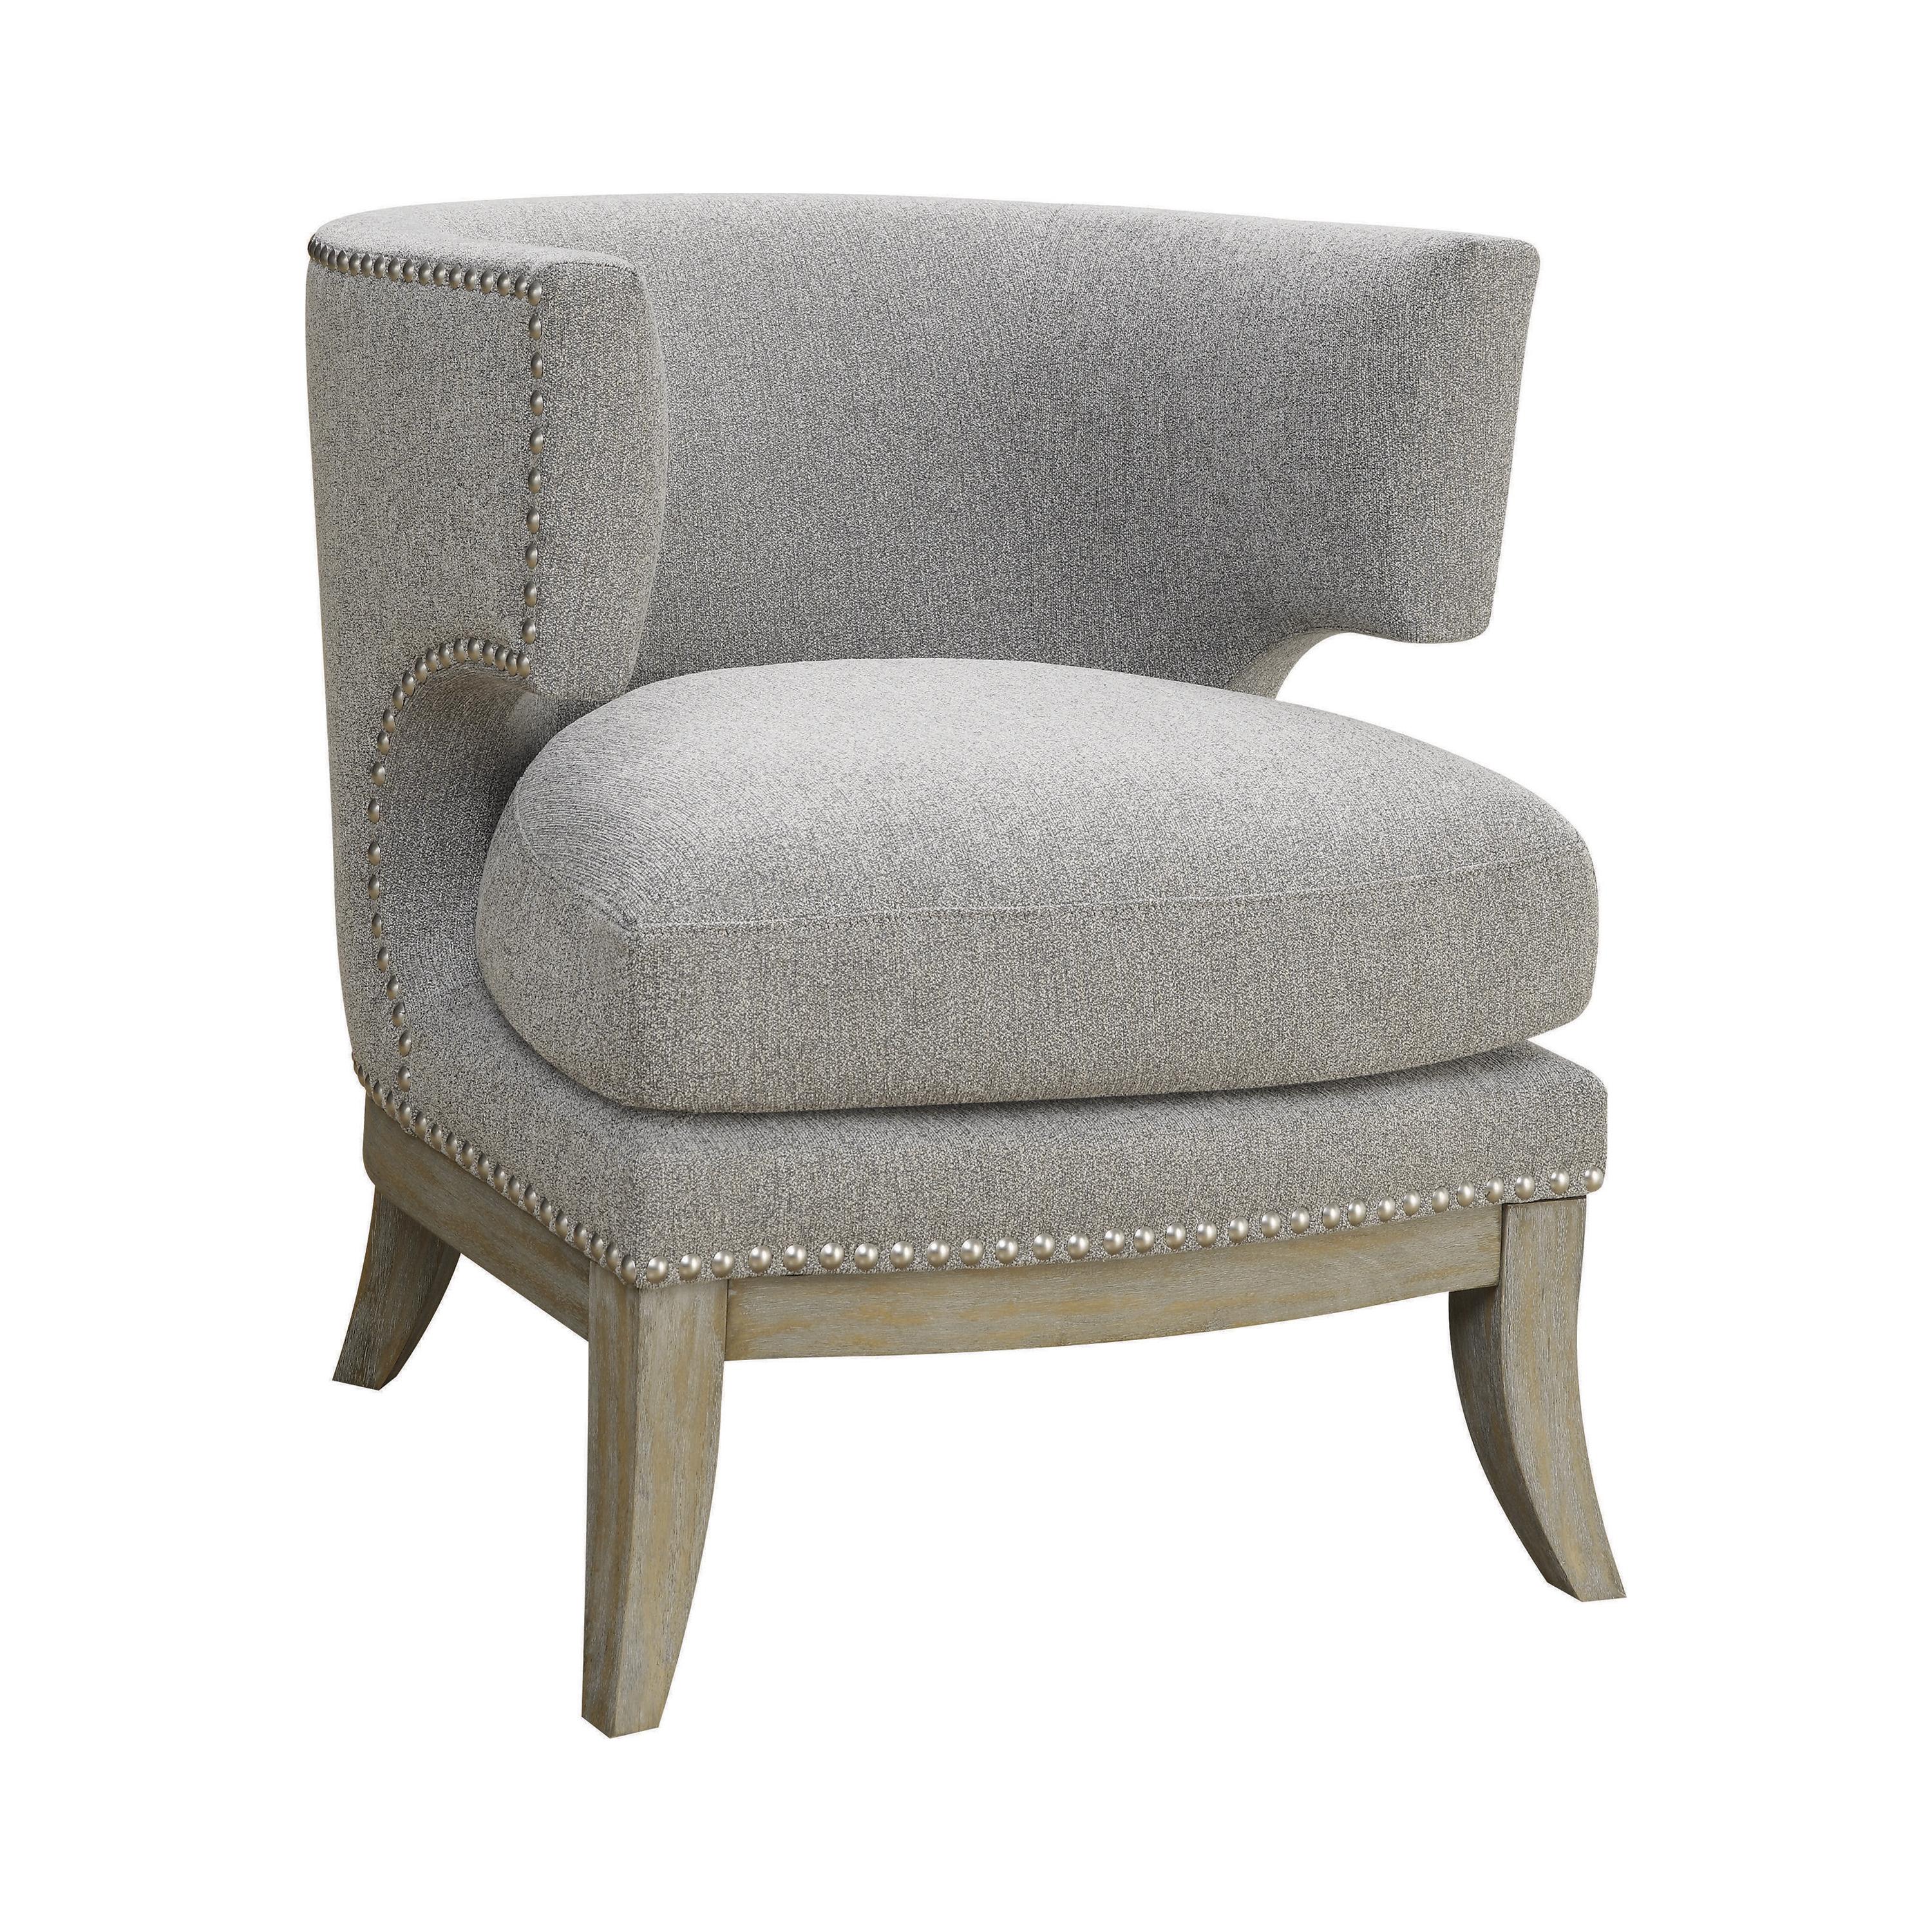 Contemporary Accent Chair 902560 902560 in Gray Chenille